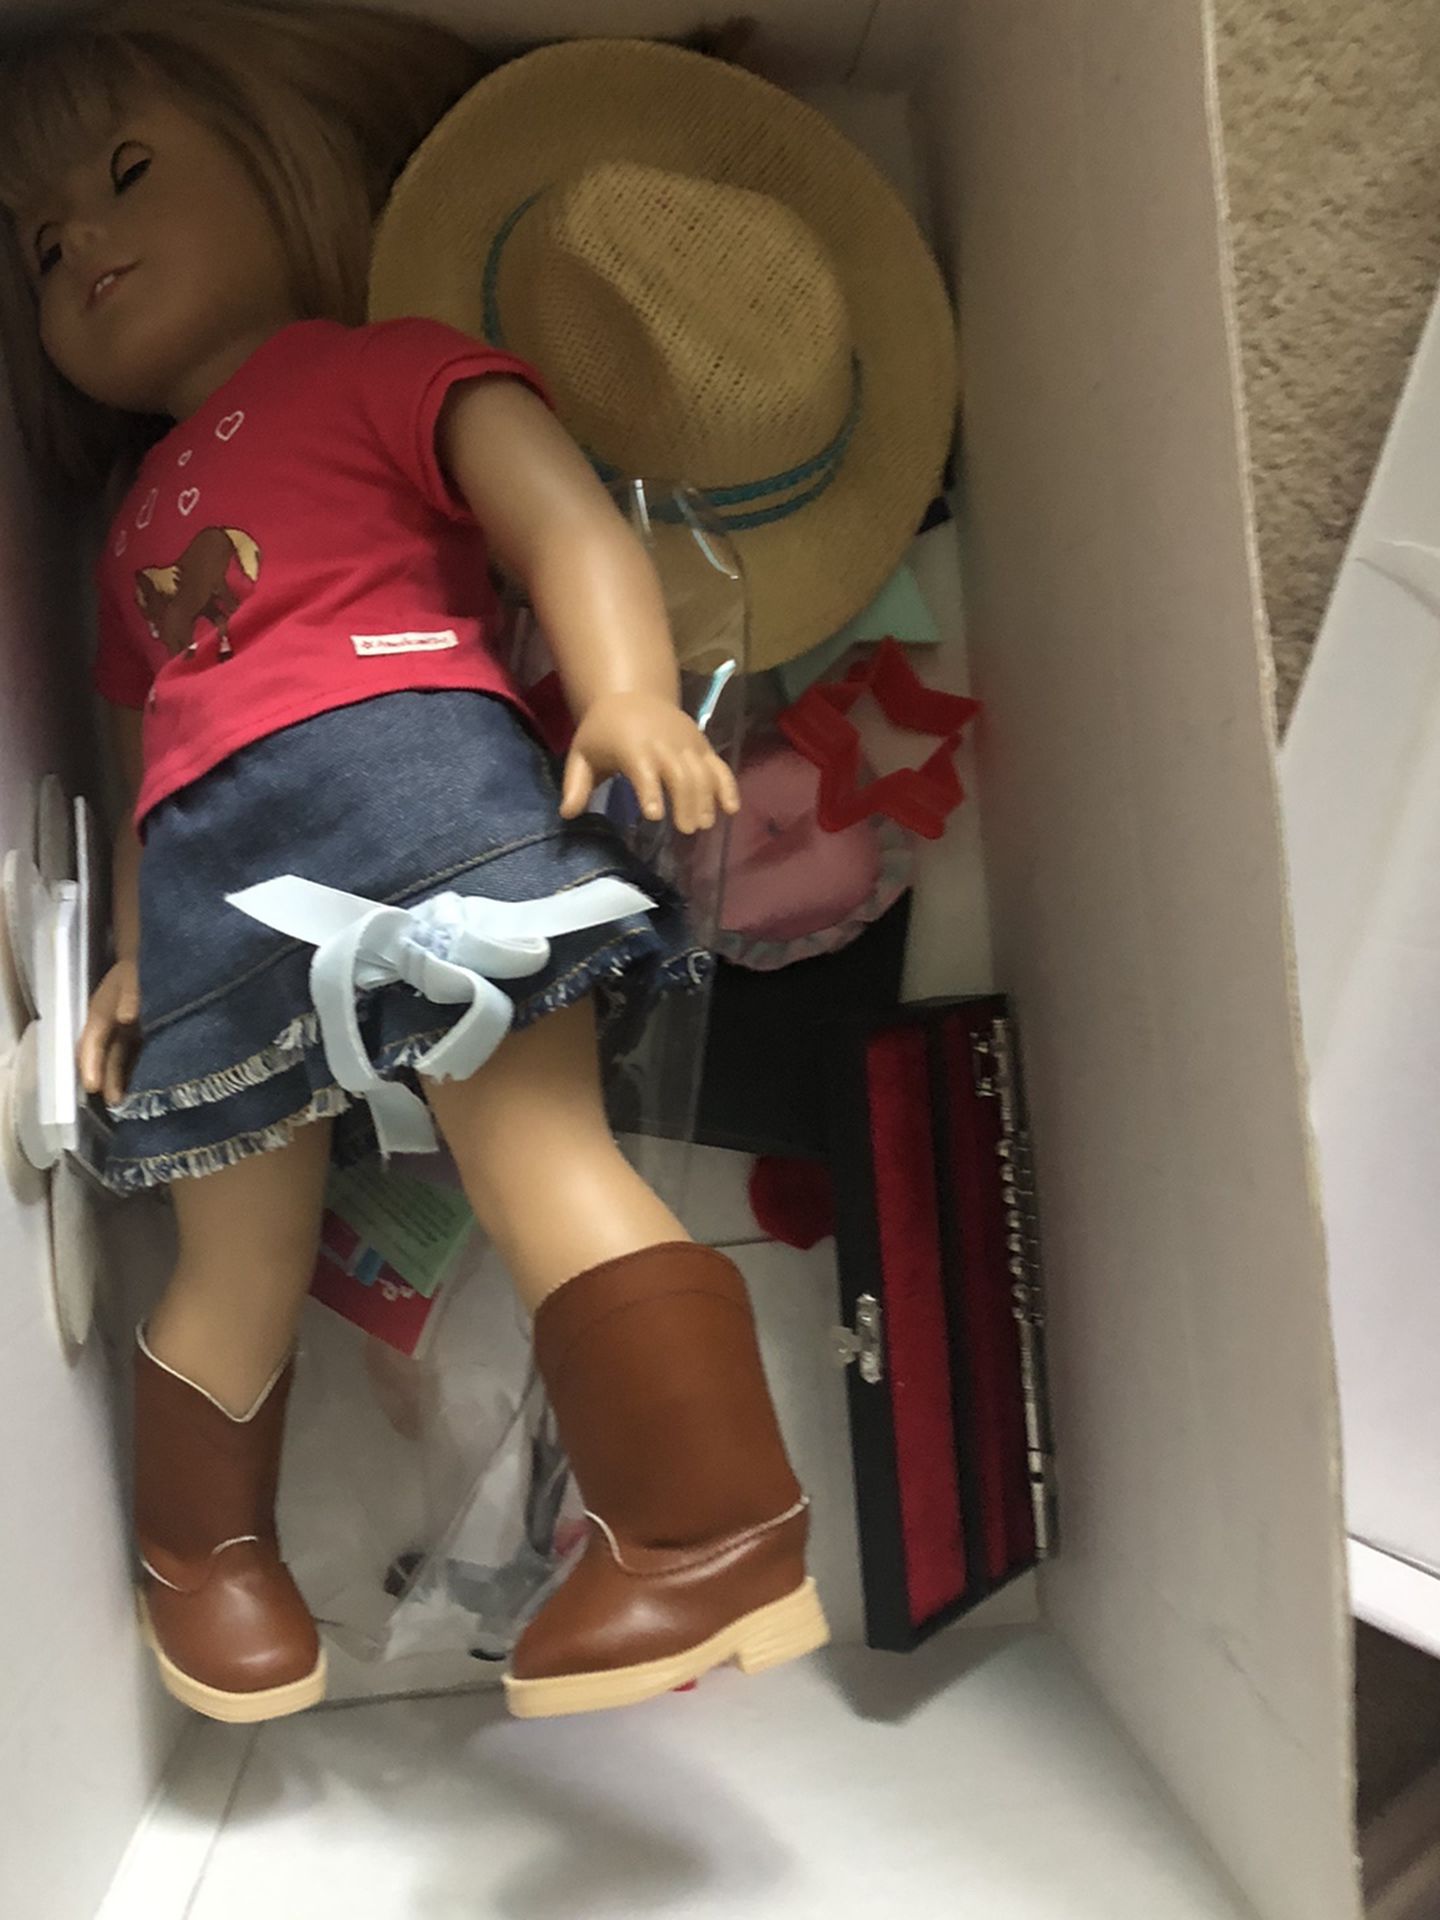 American Girl Doll And Items